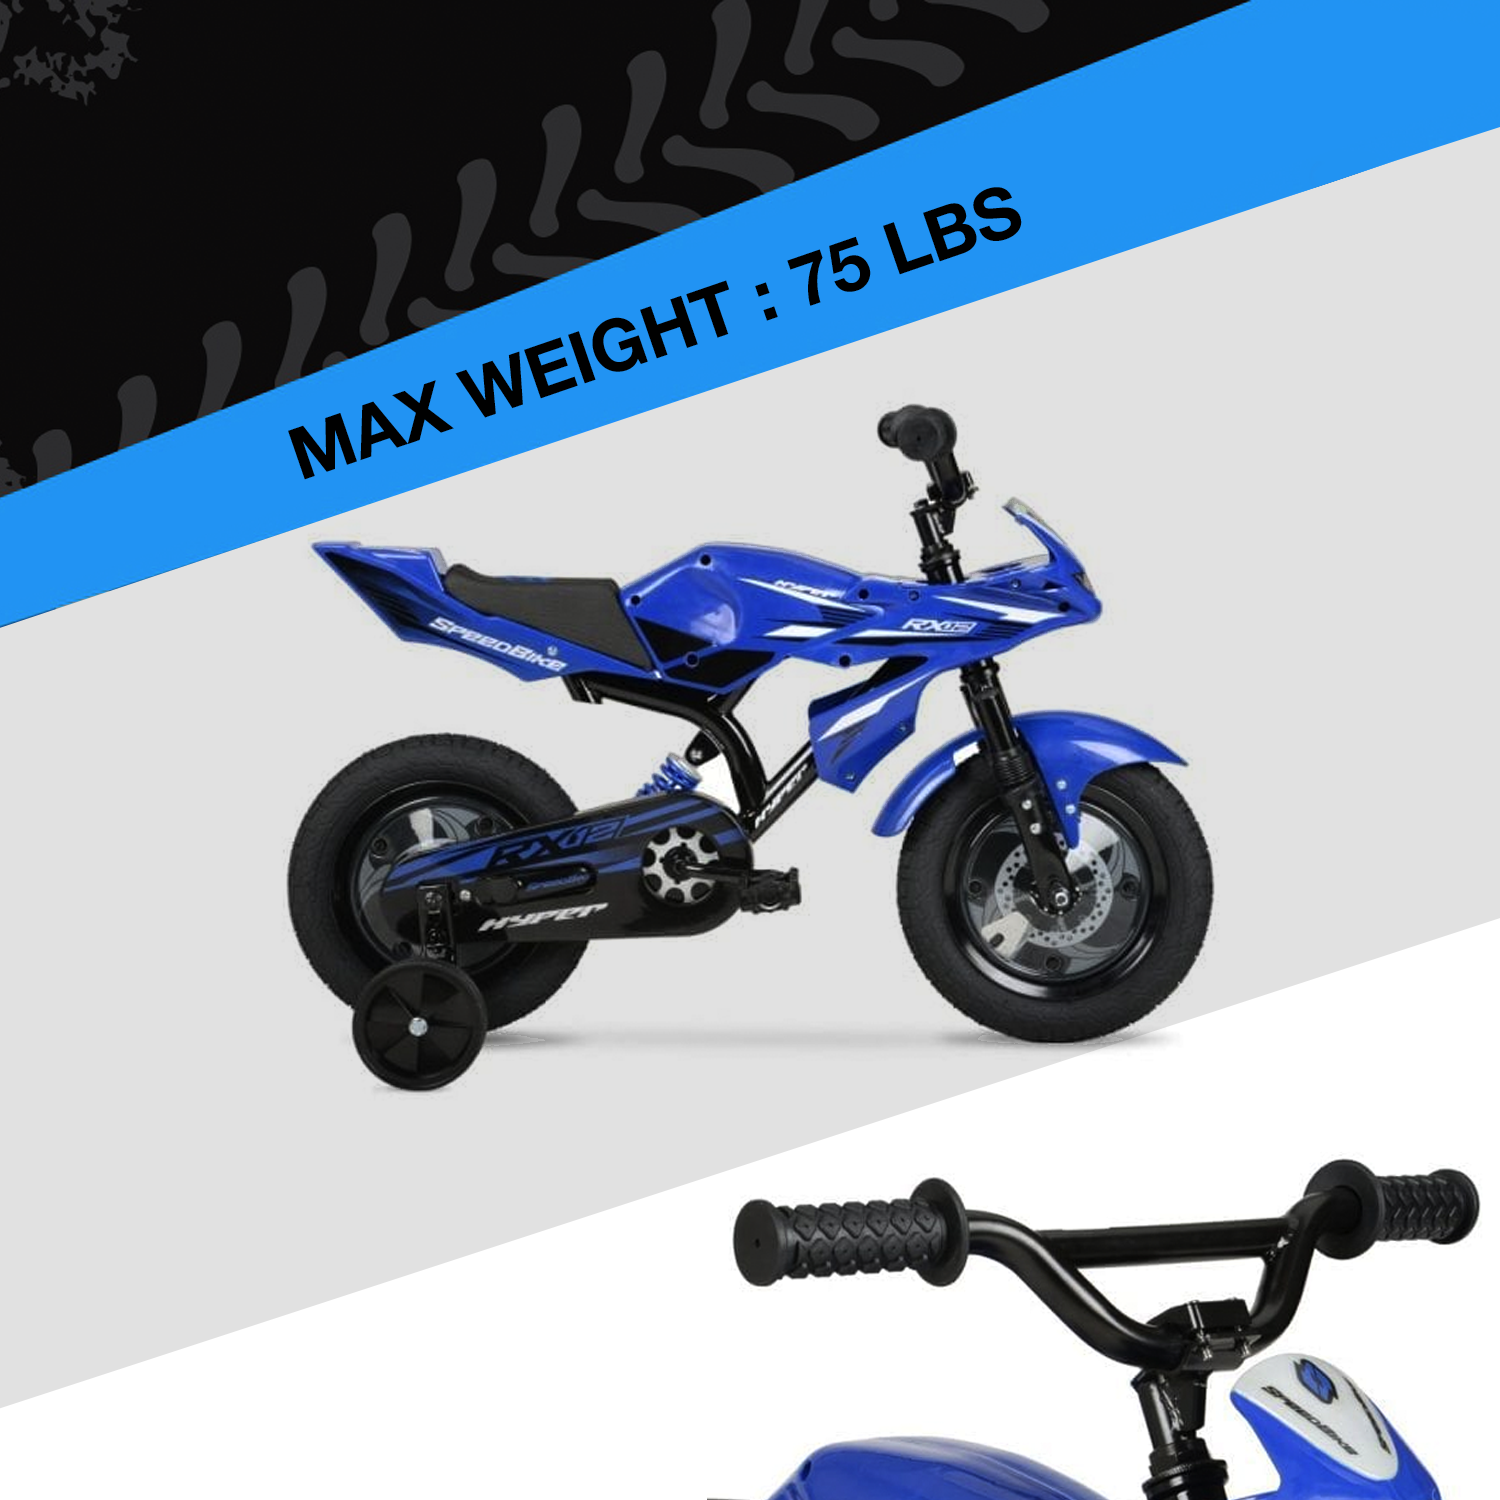 Hyper Bicycles 12" Boys Speedbike for kids, Blue, with Training Wheels, Ages 2 to 4 years old - image 3 of 9